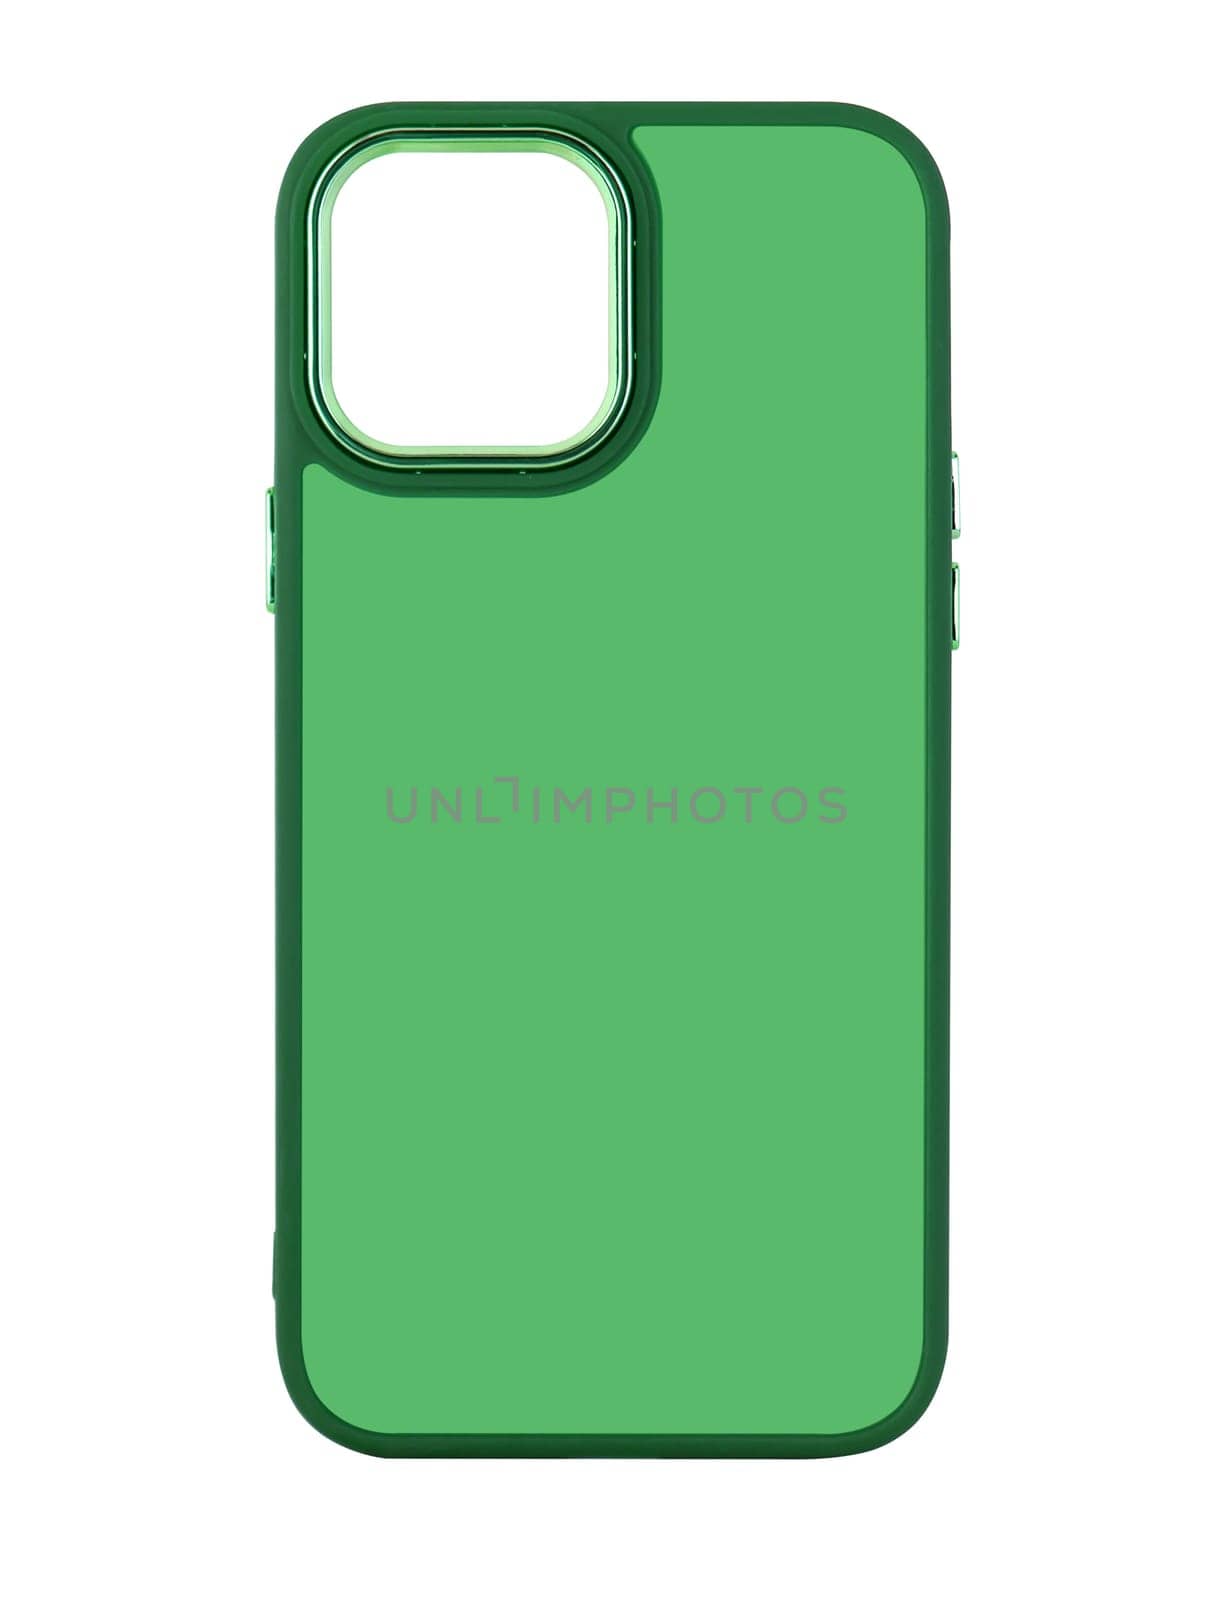 Silicone phone case, on white background in insulation